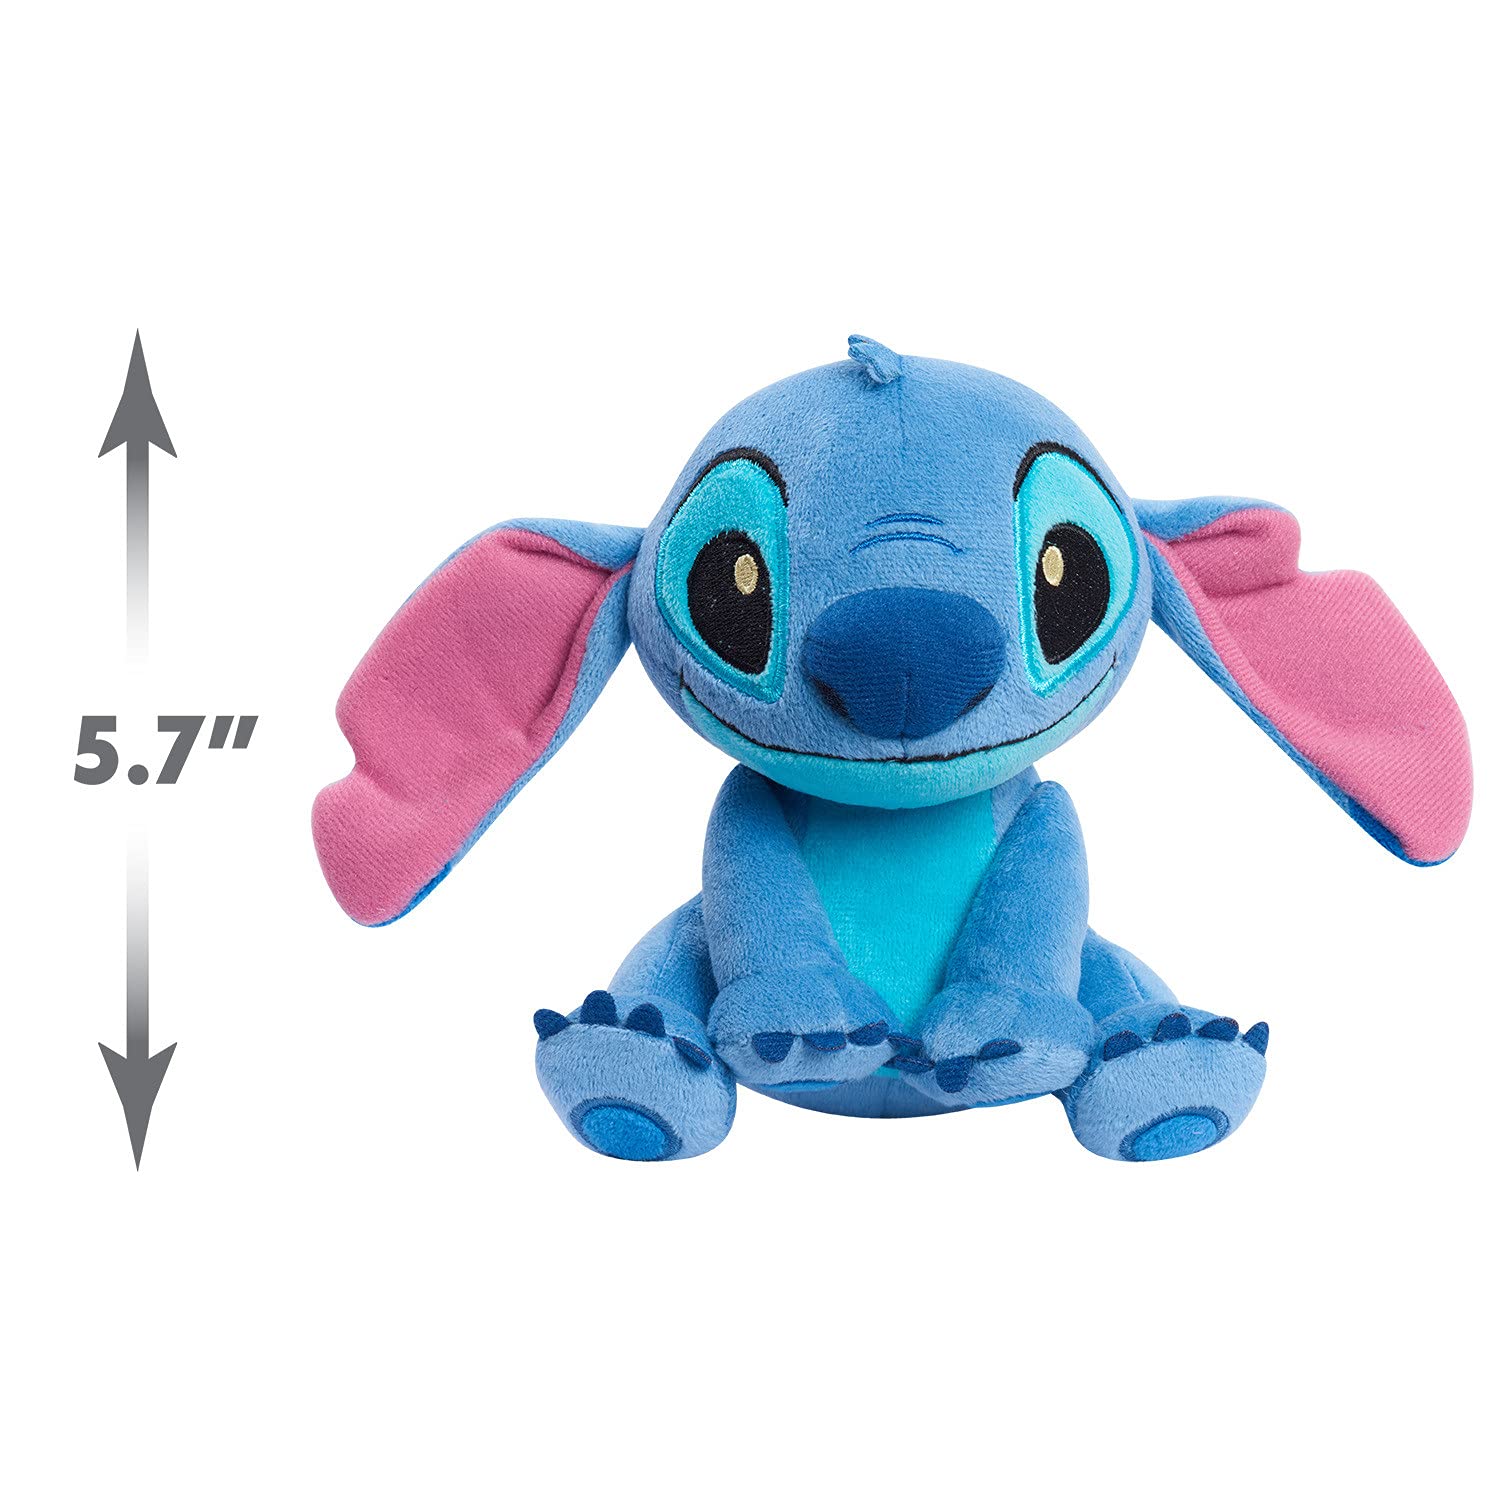 Disney’s Lilo & Stitch 7.5 Inch Beanbag Plushie, Floppy Ears Stitch, Officially Licensed Kids Toys for Ages 2 Up, Gifts and Presents by Just Play